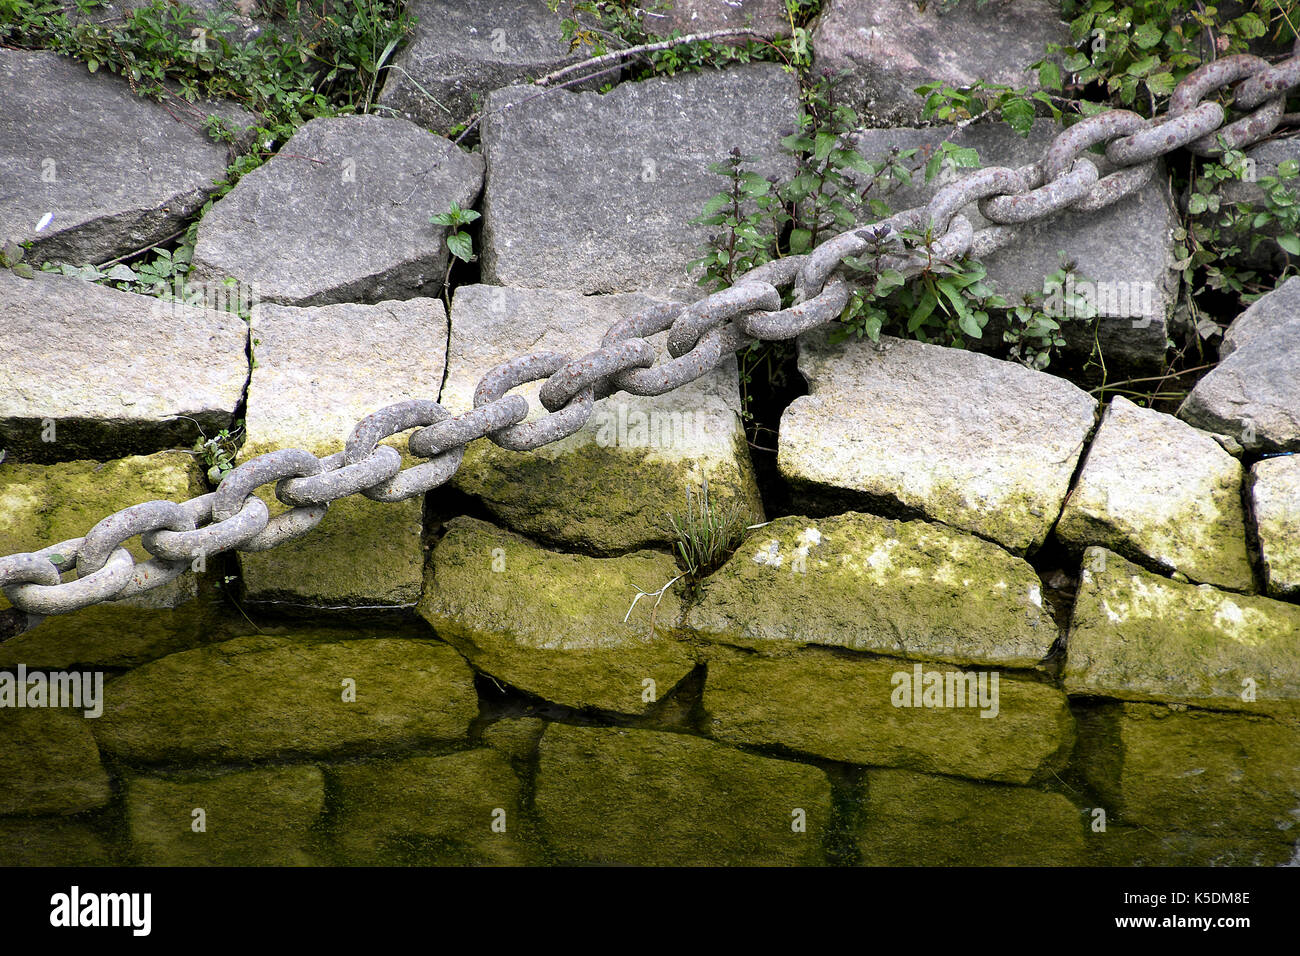 weathered iron chain over rocks with green algae Stock Photo